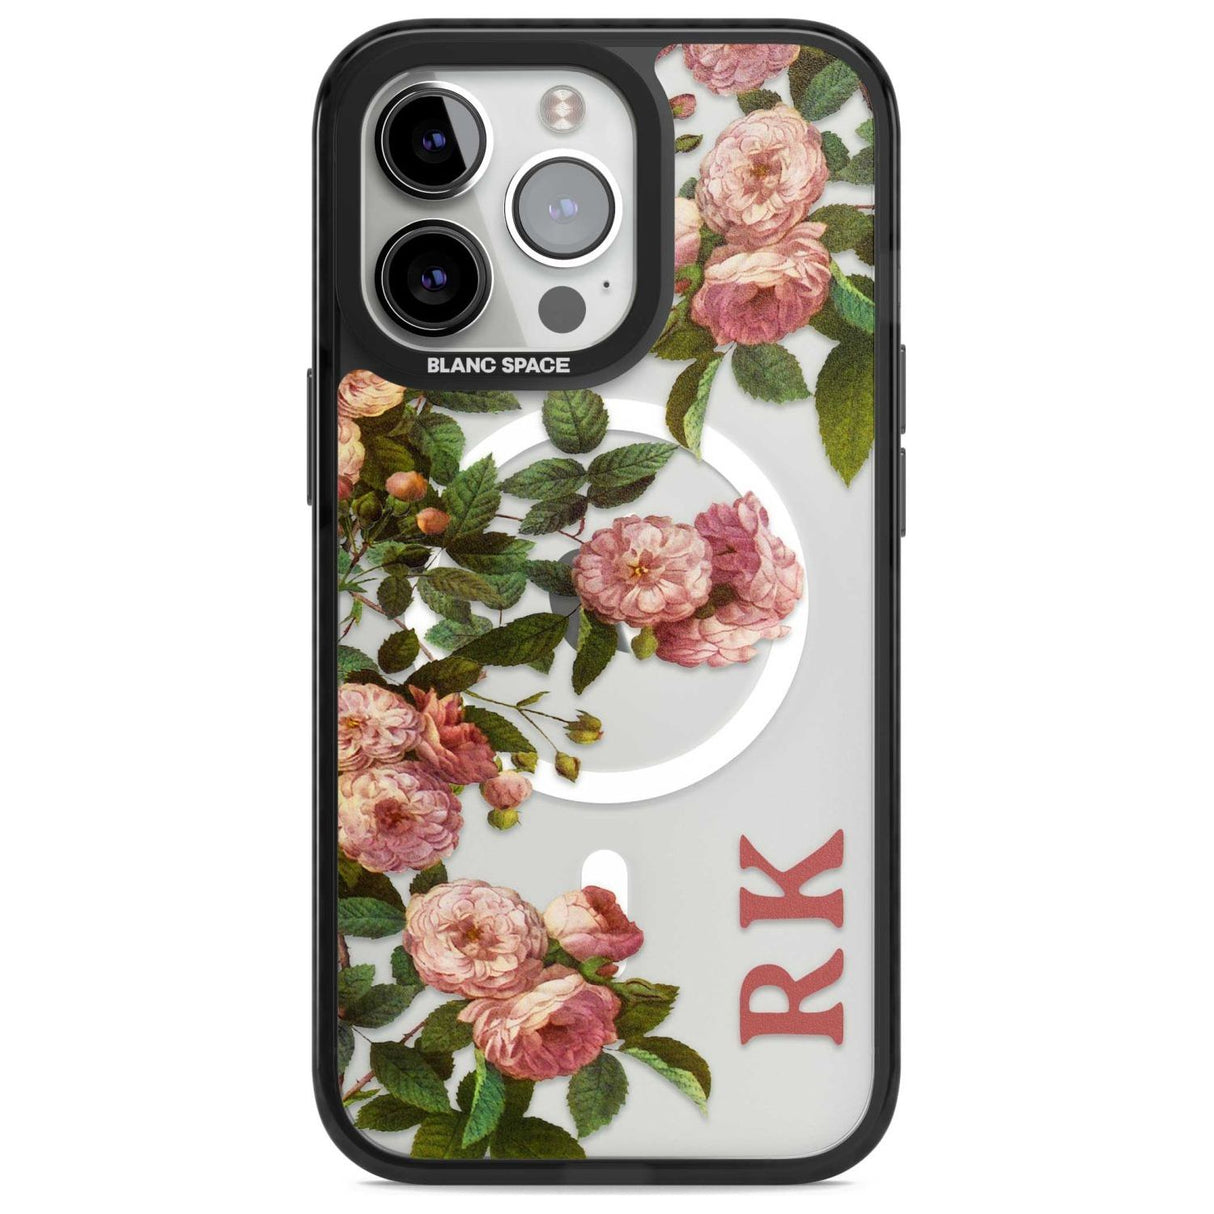 Personalised Clear Vintage Floral Pink Garden Roses Custom Phone Case iPhone 15 Pro Max / Magsafe Black Impact Case,iPhone 15 Pro / Magsafe Black Impact Case,iPhone 14 Pro Max / Magsafe Black Impact Case,iPhone 14 Pro / Magsafe Black Impact Case,iPhone 13 Pro / Magsafe Black Impact Case Blanc Space